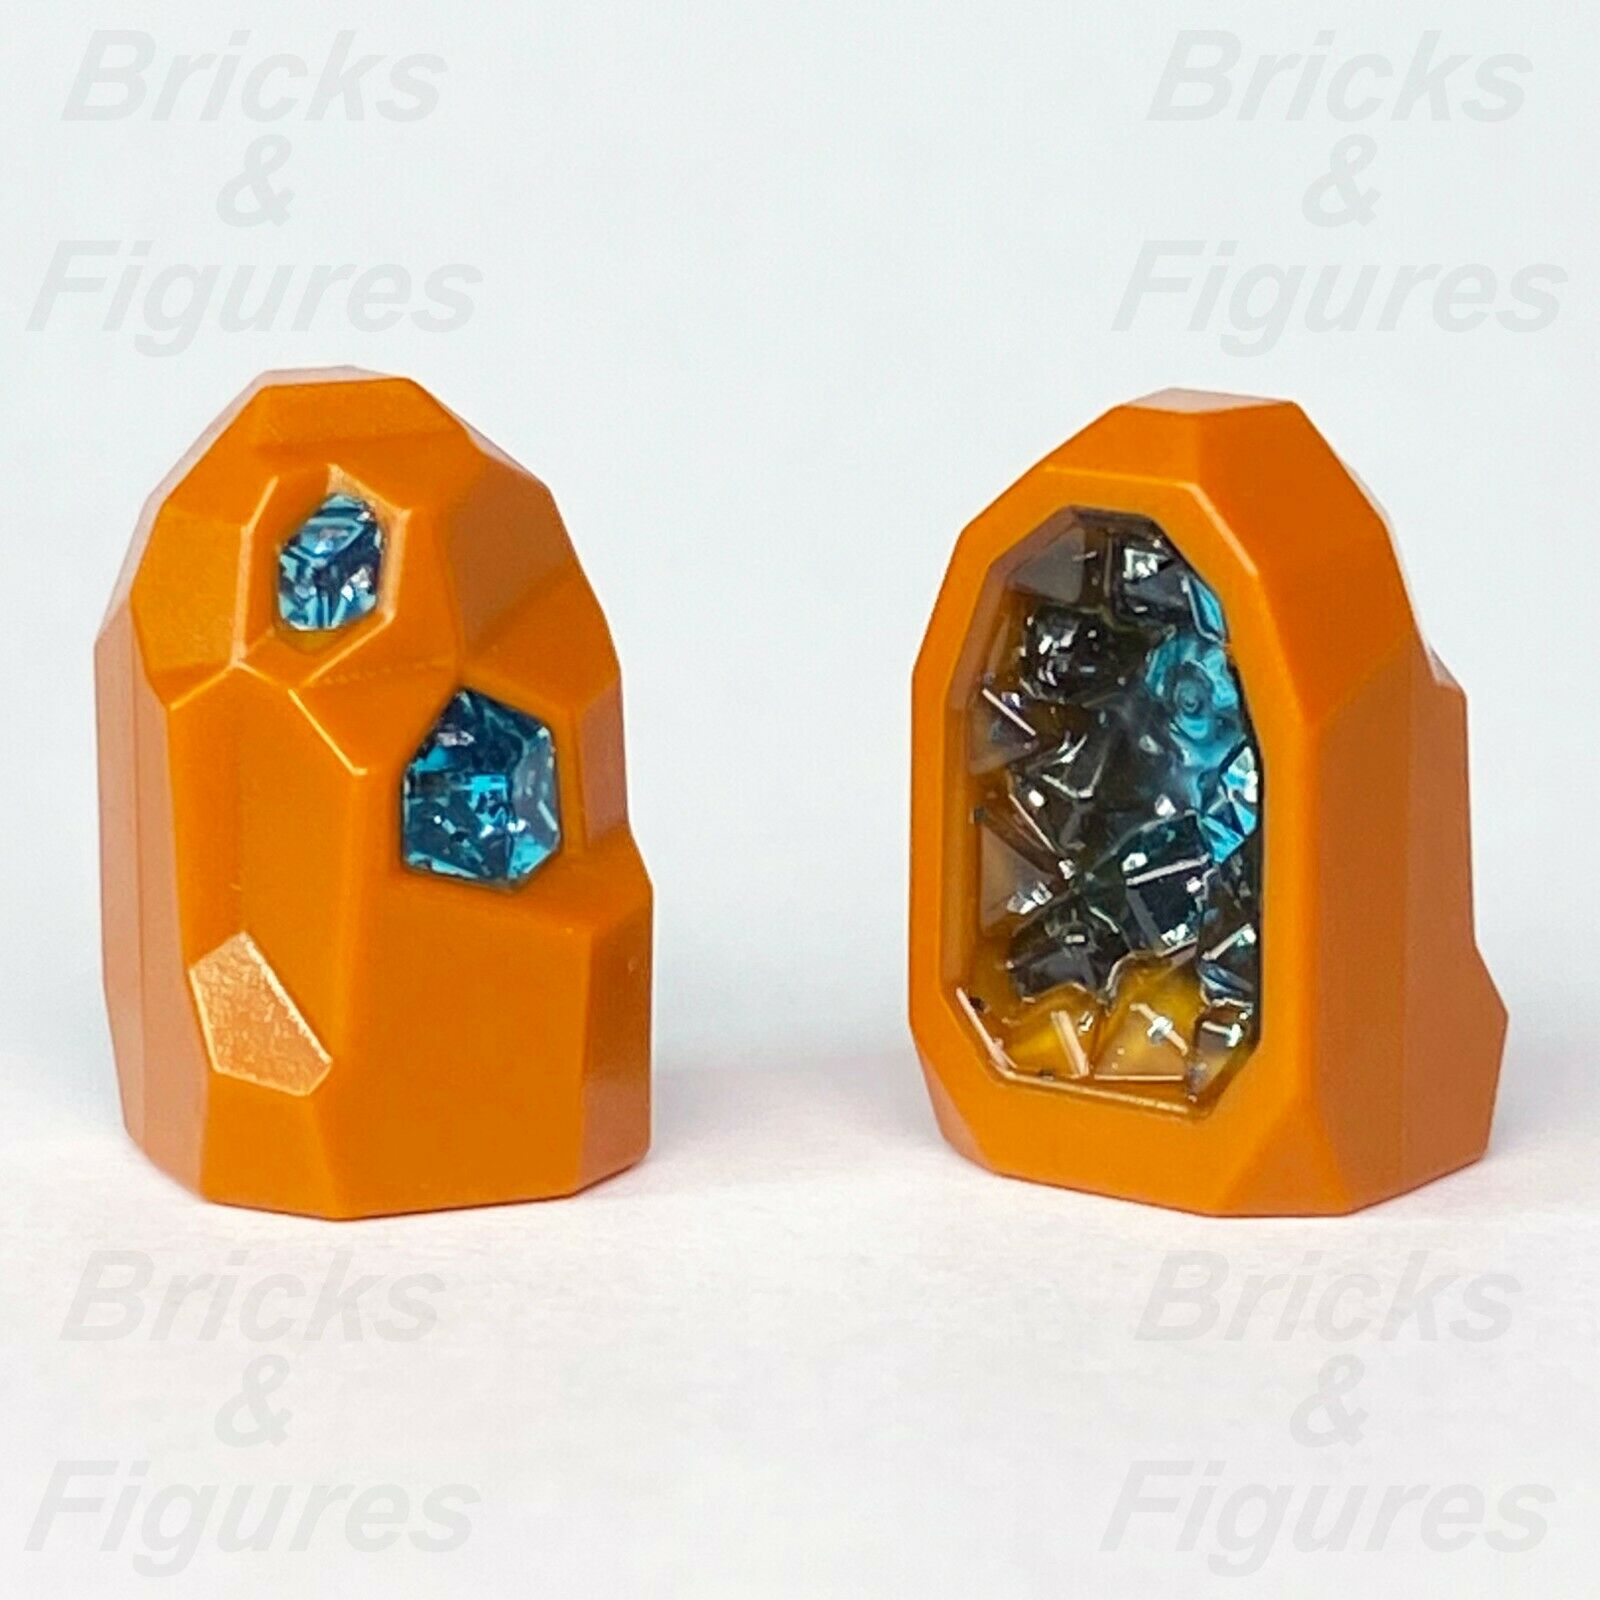 2 x Town City LEGO Rock Geode with Light Blue Crystals Space Port 60227 60226 - Bricks & Figures